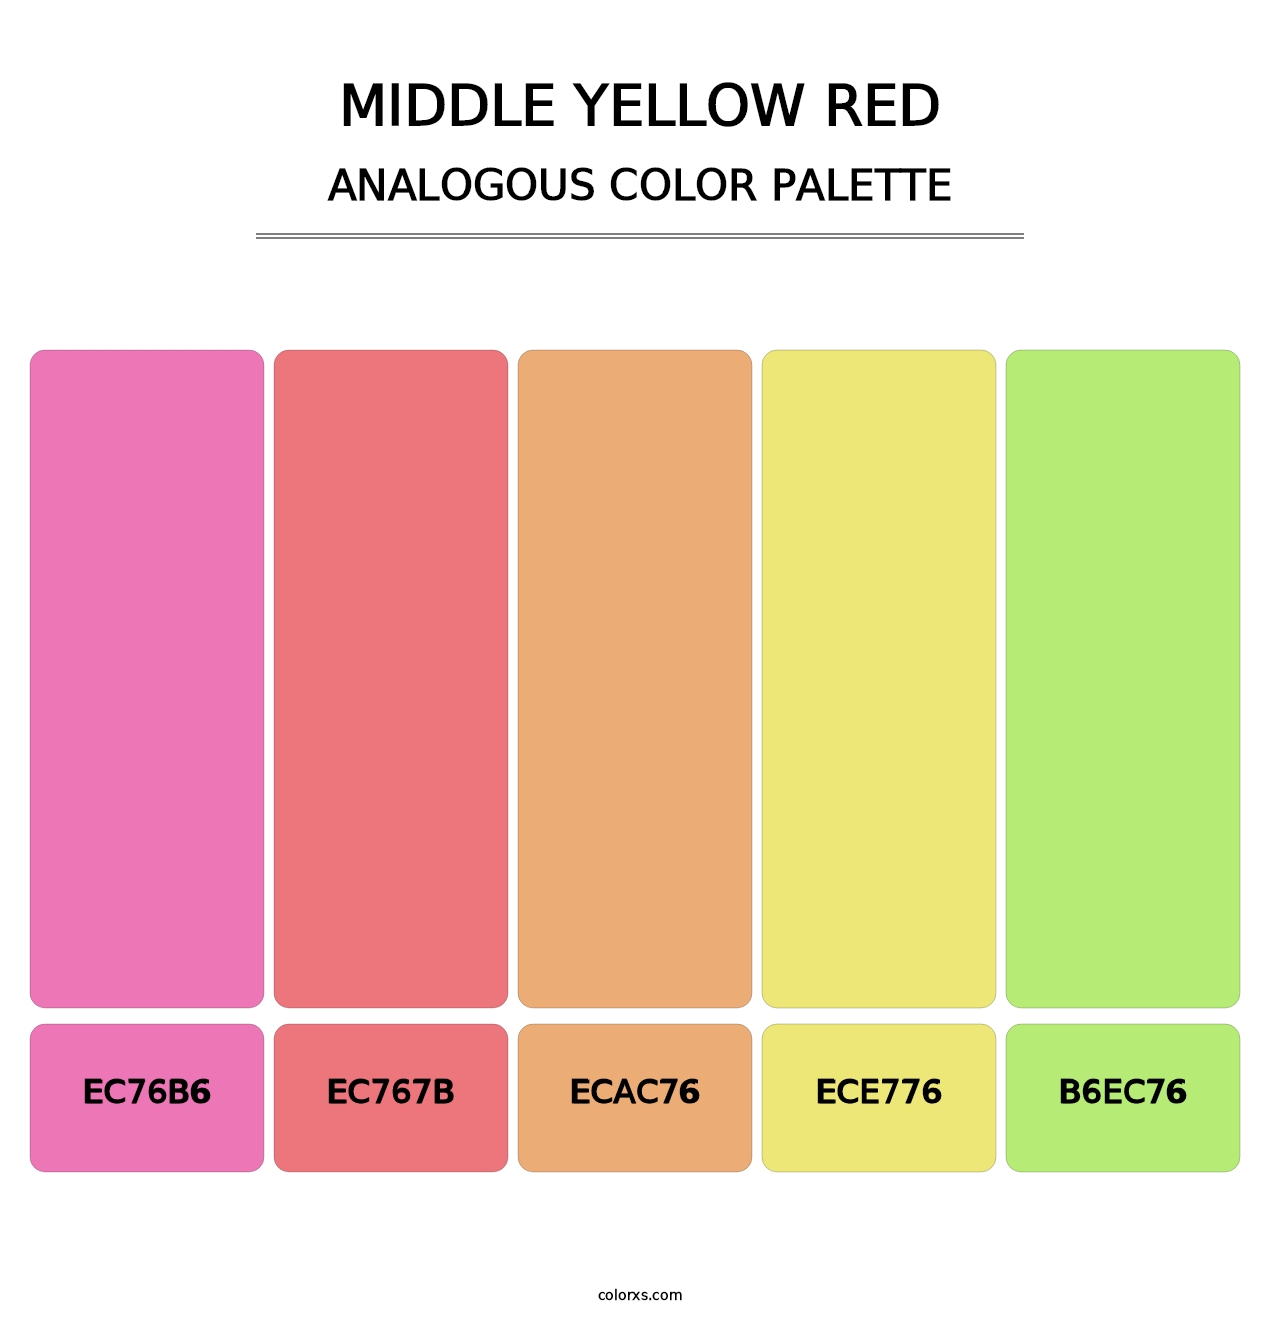 Middle Yellow Red - Analogous Color Palette